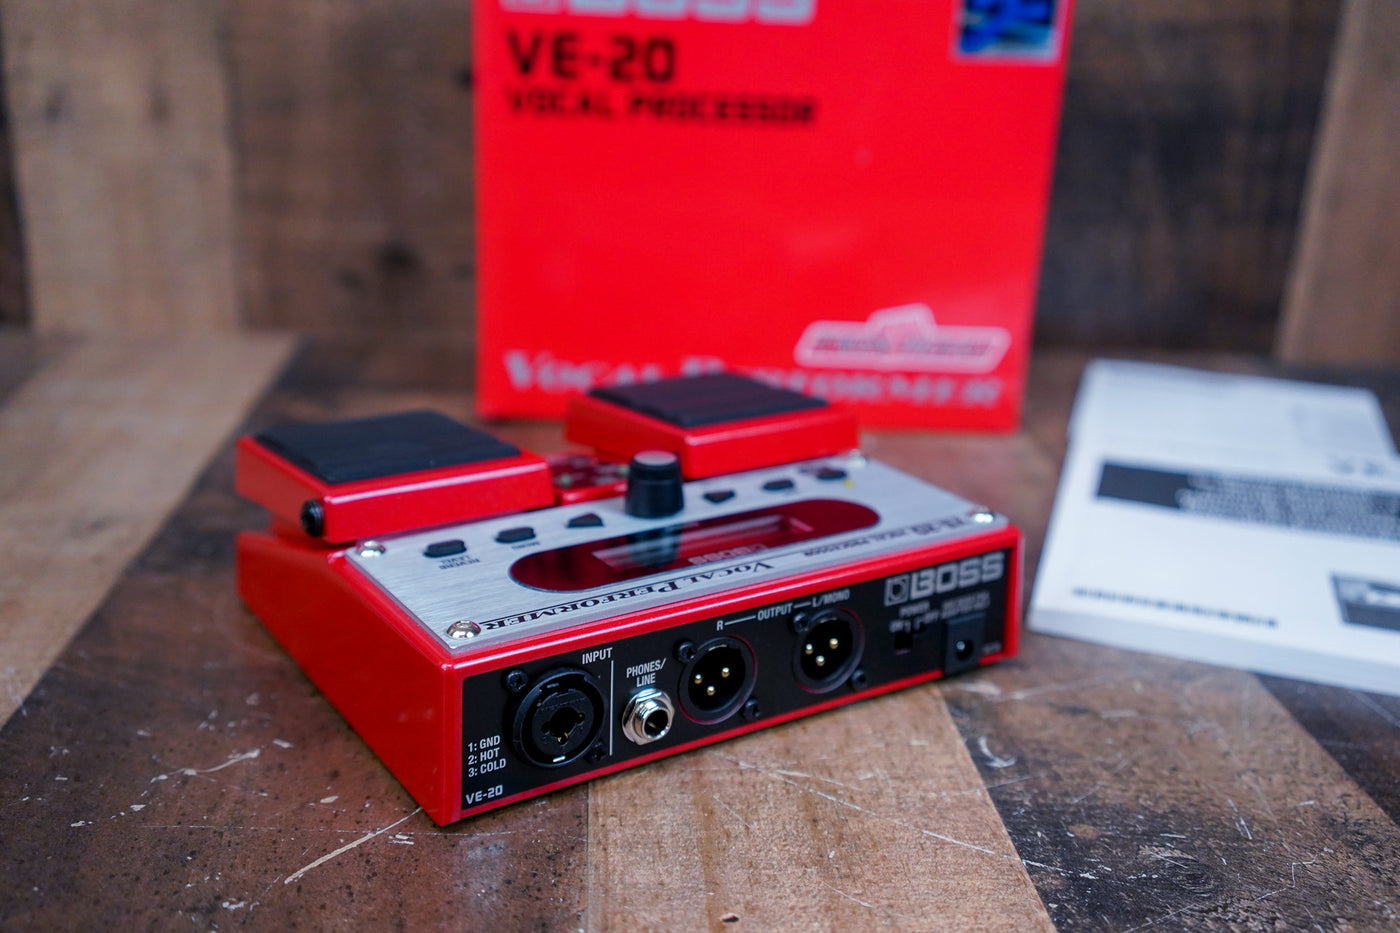 Boss VE-20 Vocal Performer Red in Box w/ Manual – A Flash Flood of